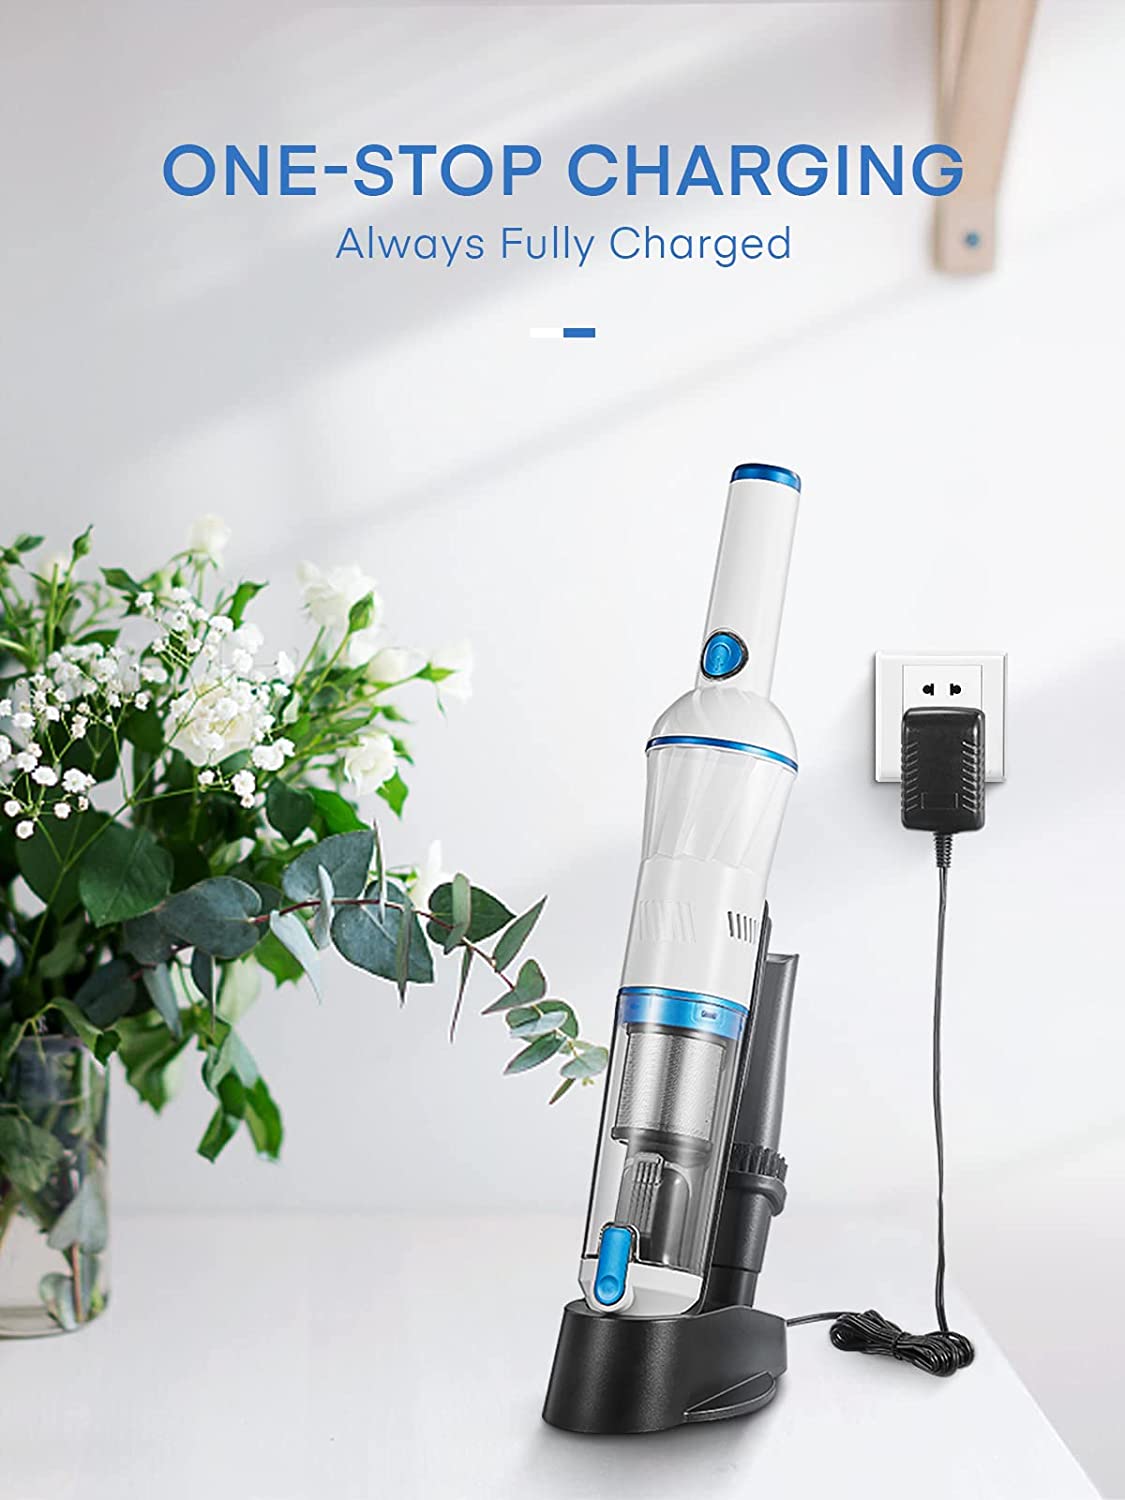 AUYOU-Battery Handheld Vacuum Cleaner, 12KPa Handheld Vacuum Cleaner, Bagless, Washable HEPA Filter, 20 Mins Running Time with Charging Station, Lightweight Car Vacuum Cleaner for Car, Kitchen, Office, Home, White, 28 x 7 x 7 cm